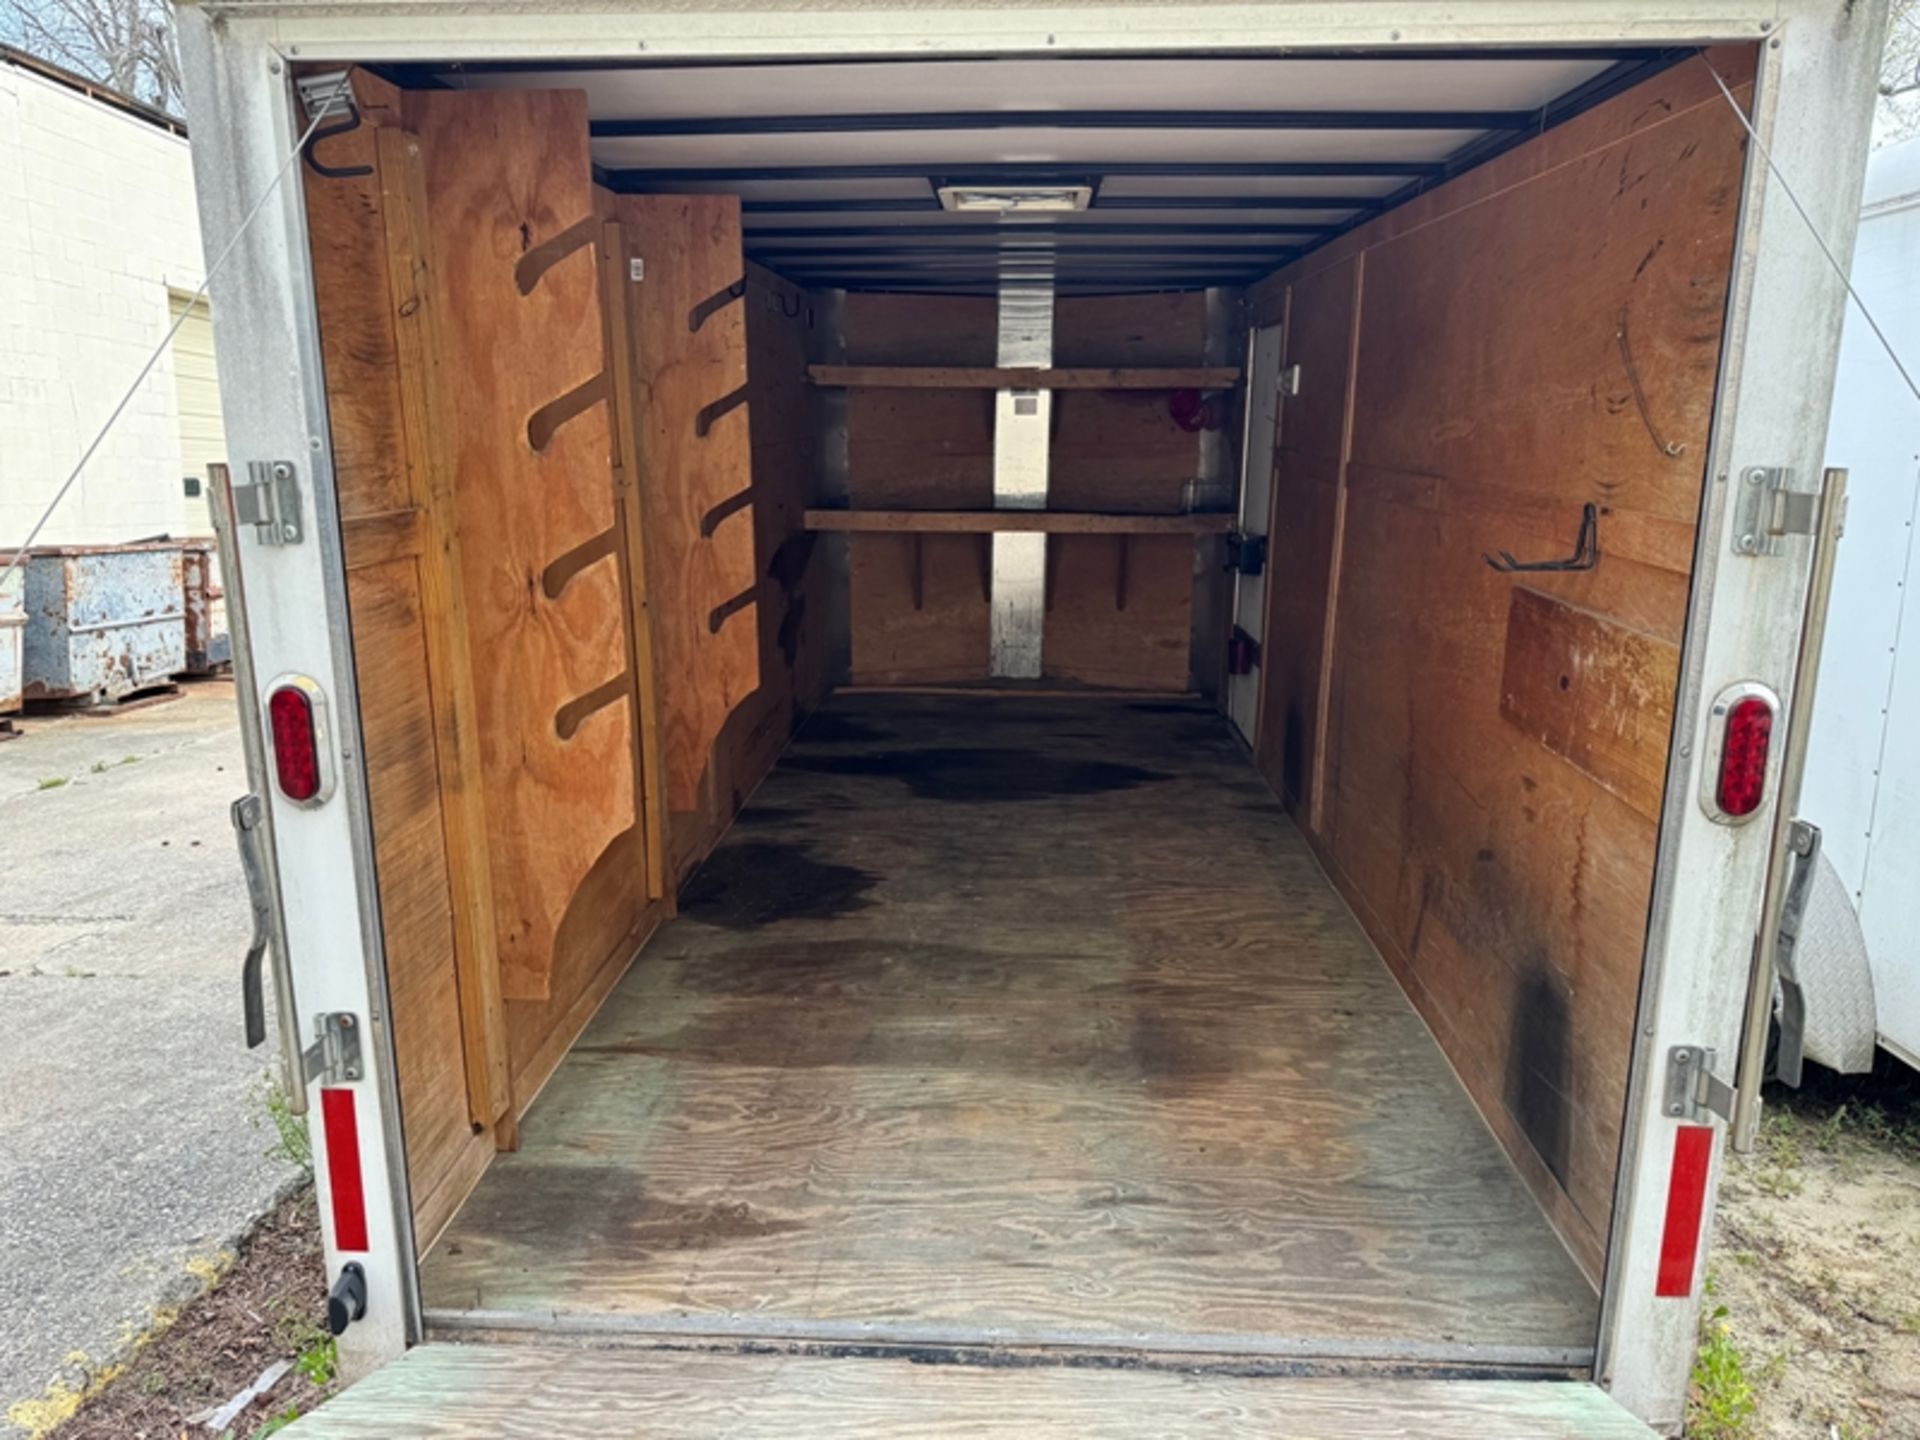 2015 ARISING INDUSTRIES 7'x16' v-nose enclosed trailer - 5YCBE162XFH021727 - Image 5 of 5